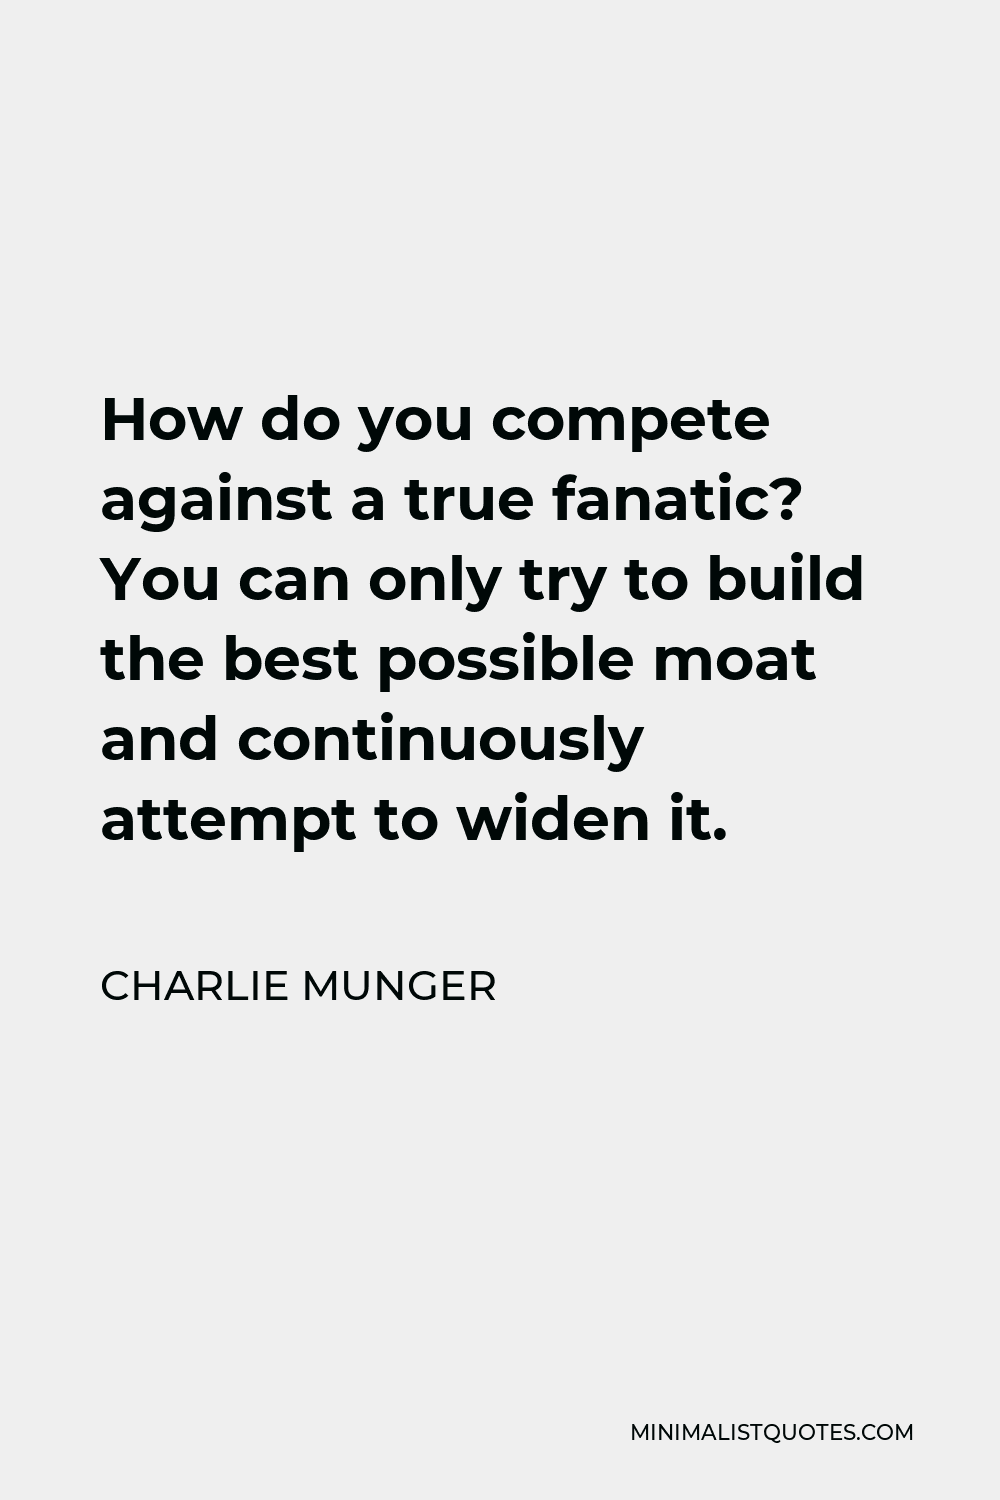 Charlie Munger Quote - How do you compete against a true fanatic? You can only try to build the best possible moat and continuously attempt to widen it.